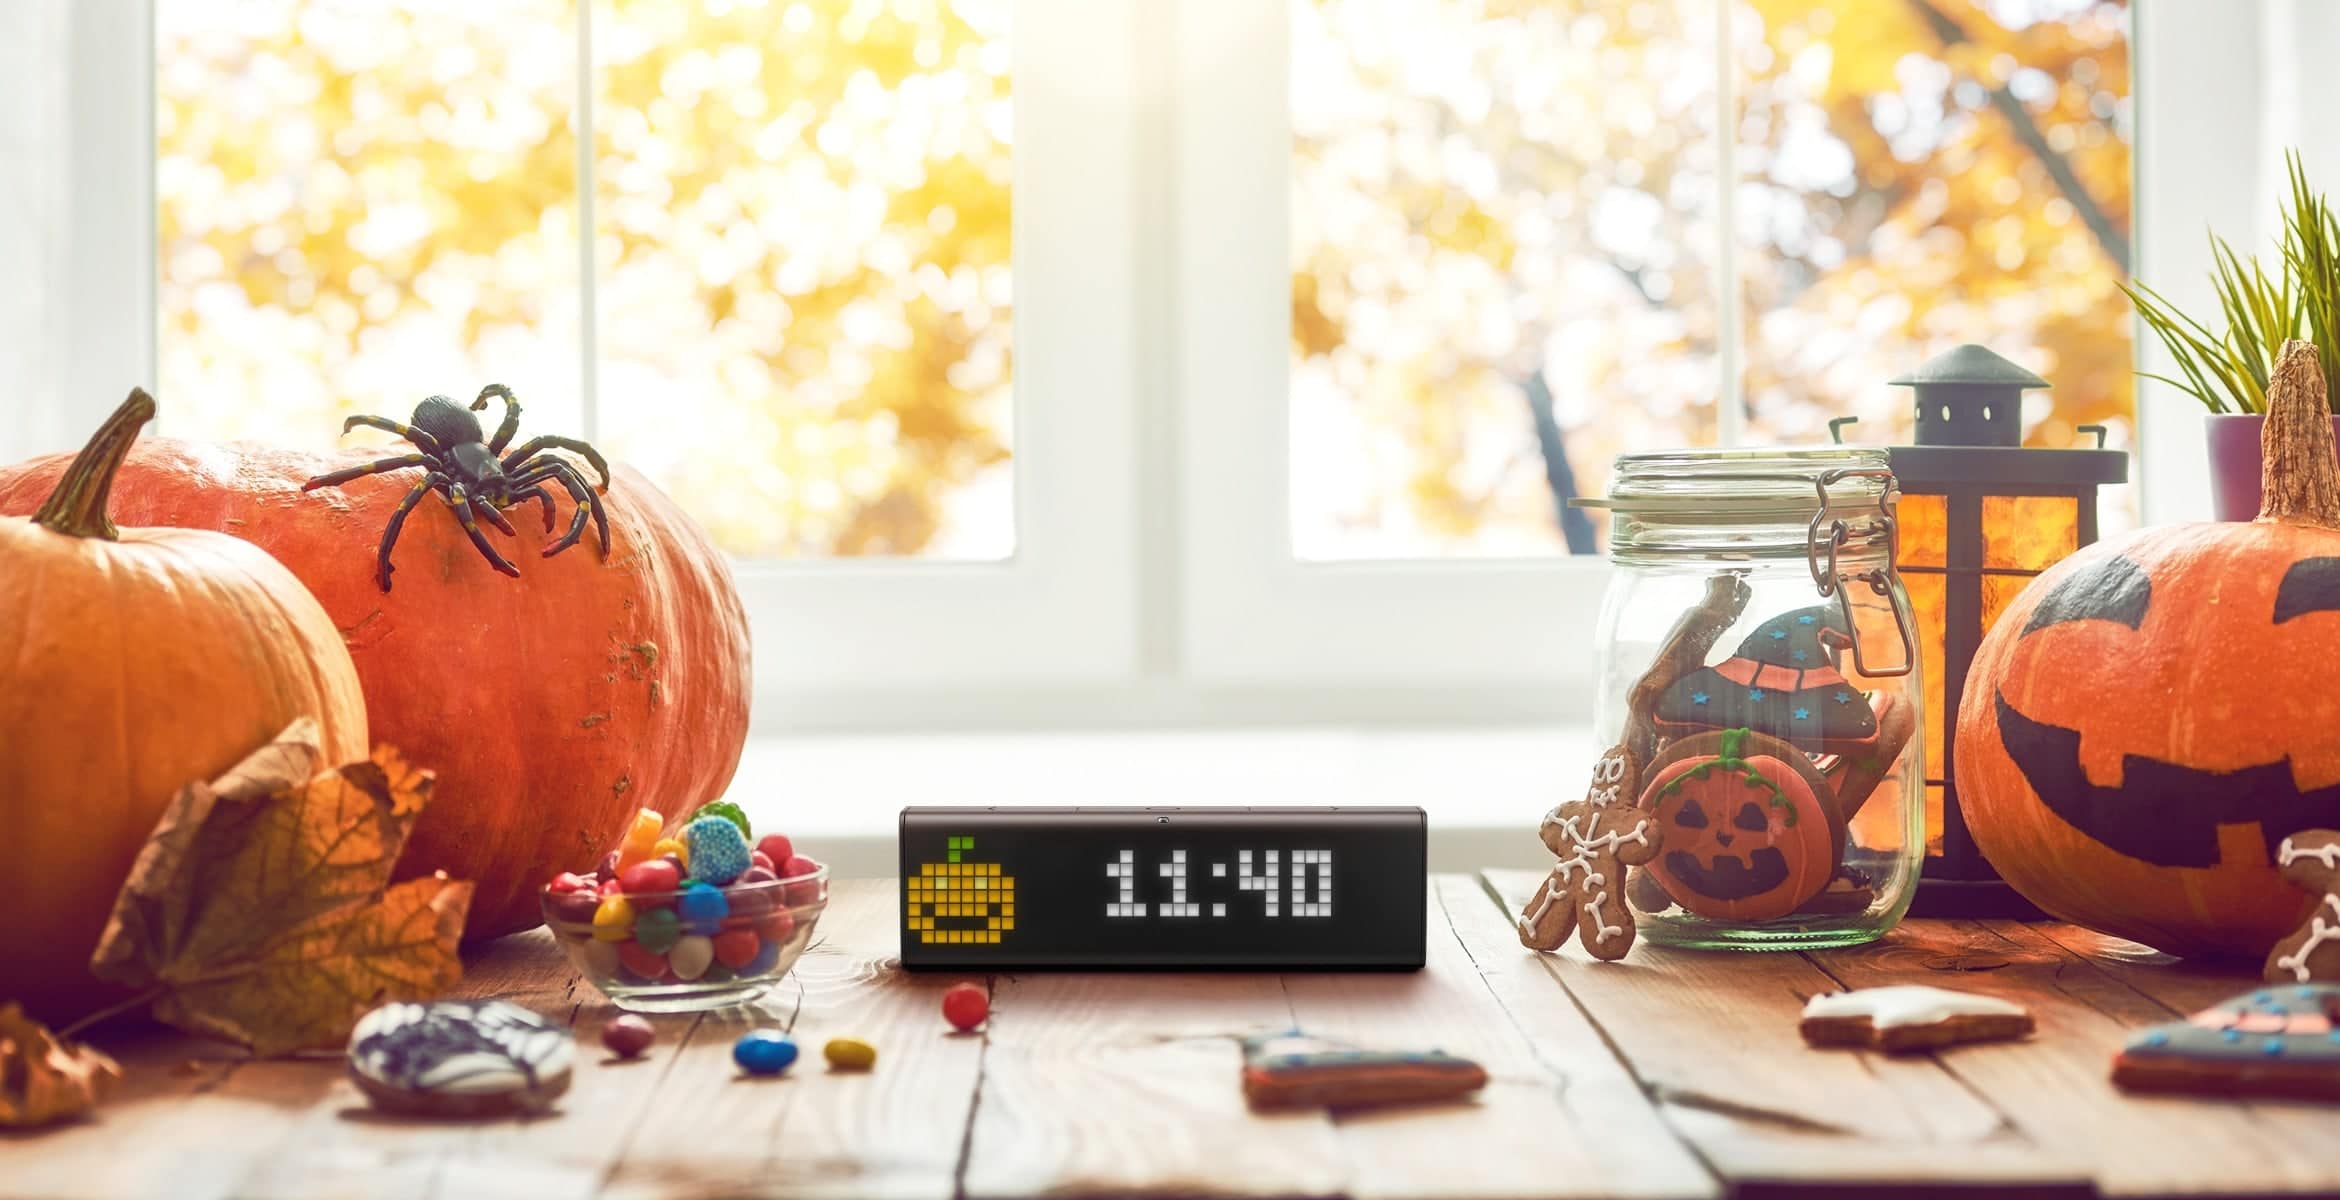 LaMetric Time smart clock displays time and a pumpkin clock face, standing on a table with Halloween decorations